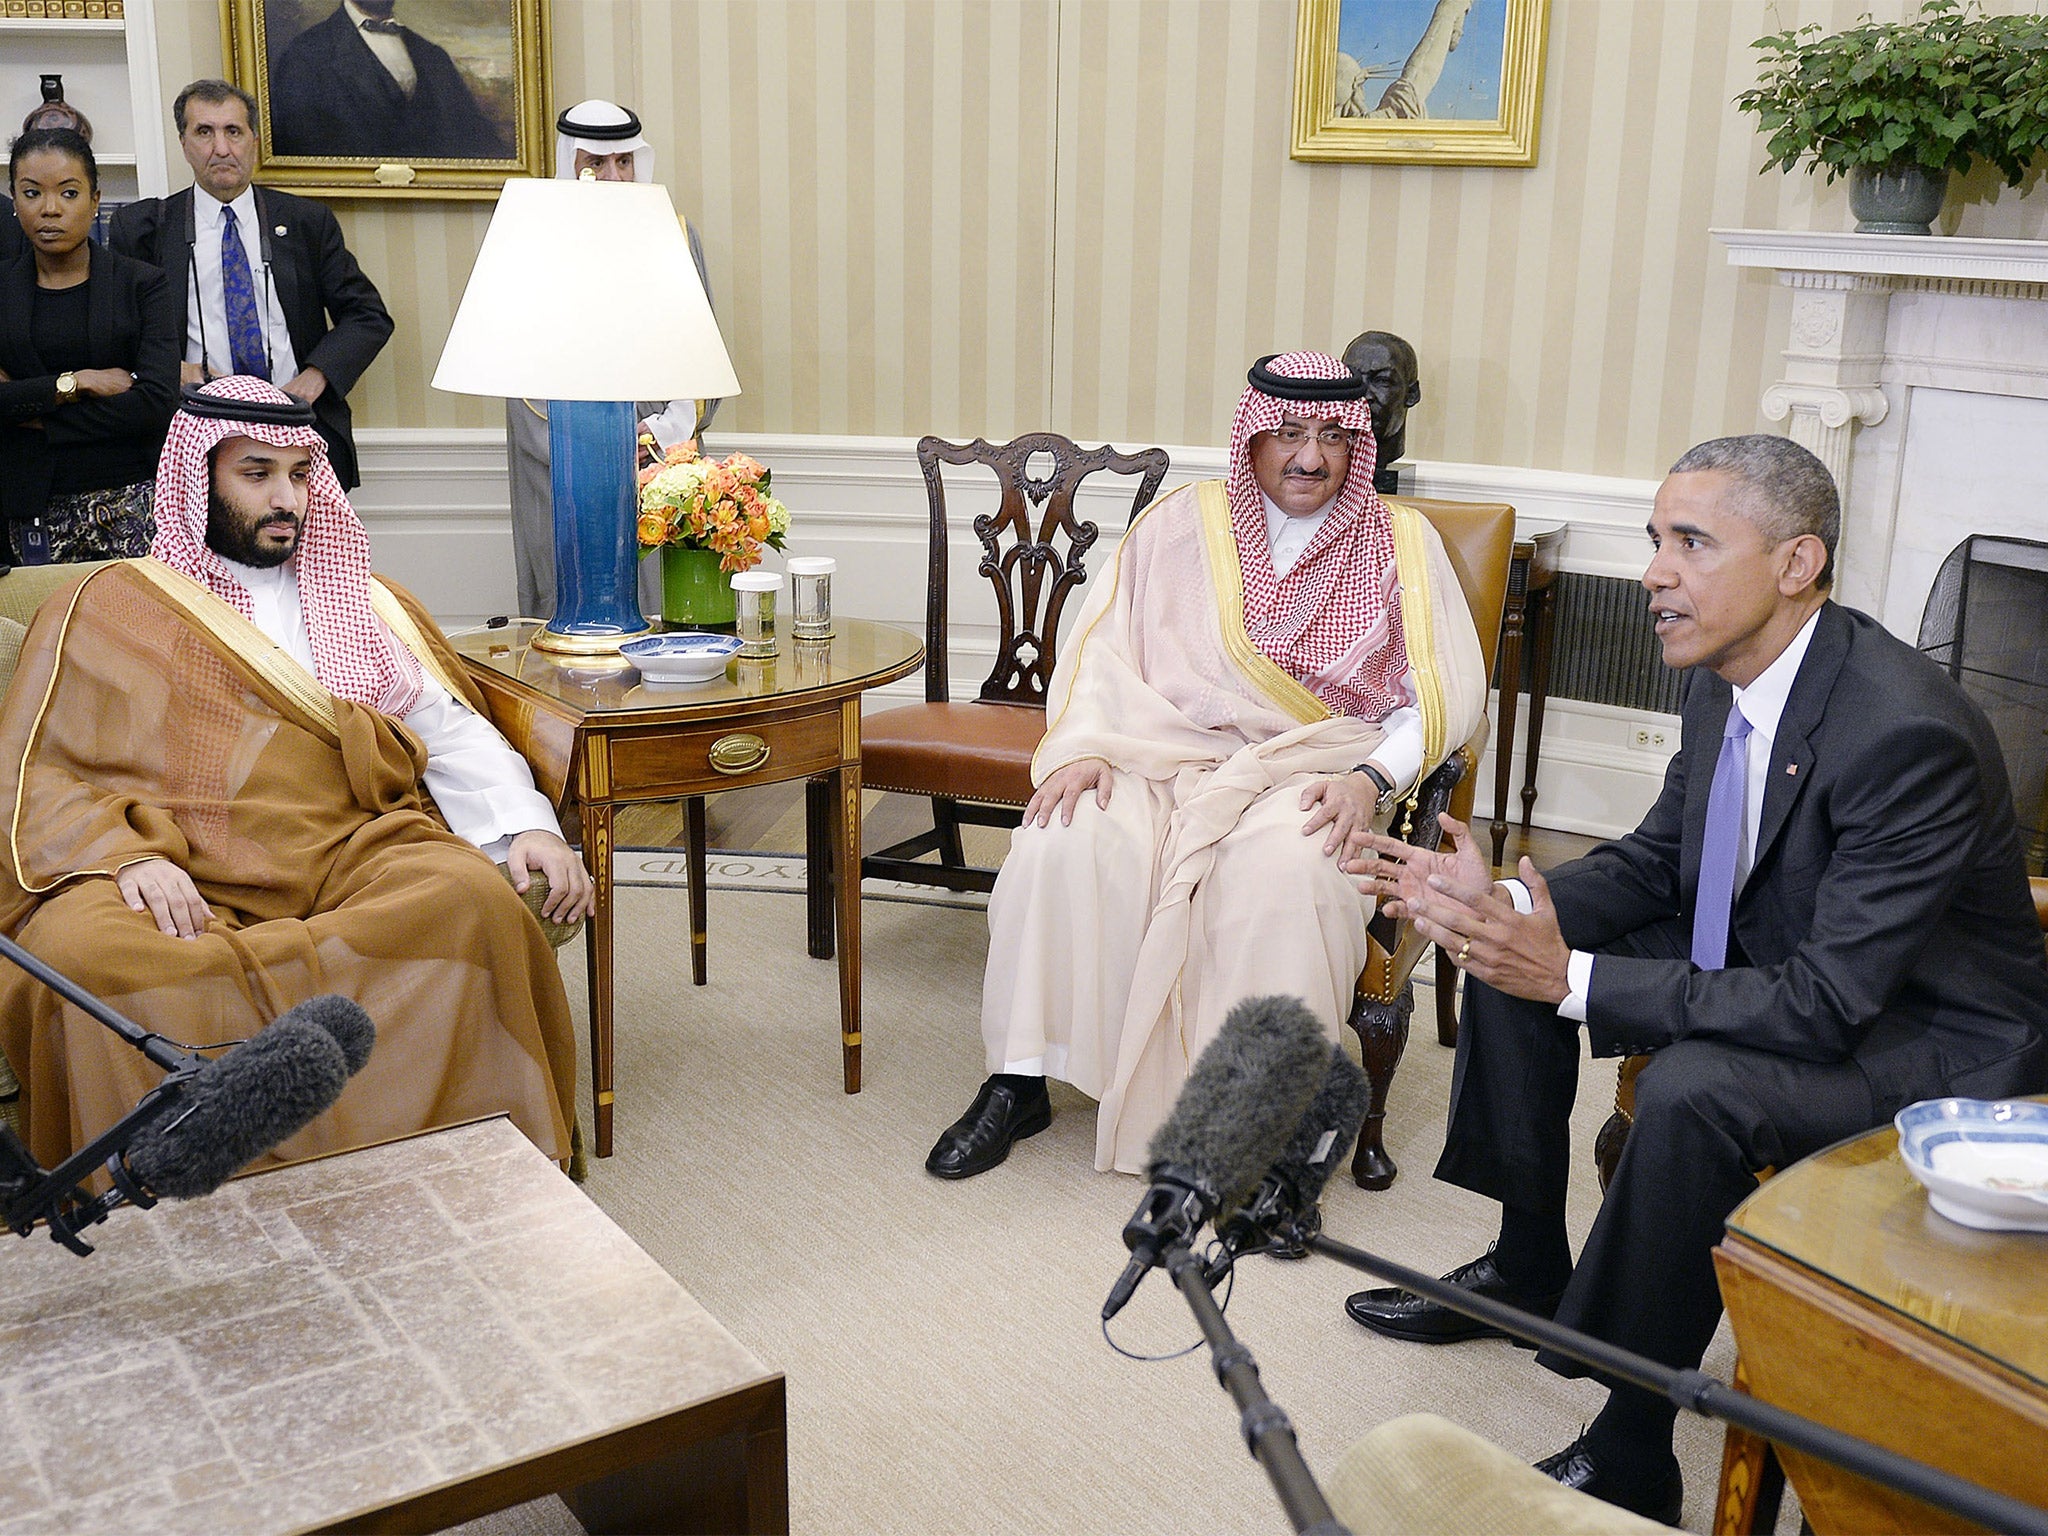 President Obama holding a meeting with Crown Prince Mohammed bin Nayef and Deputy Crown Prince Mohammed bin Salman (left) of Saudi Arabia in the Oval Office